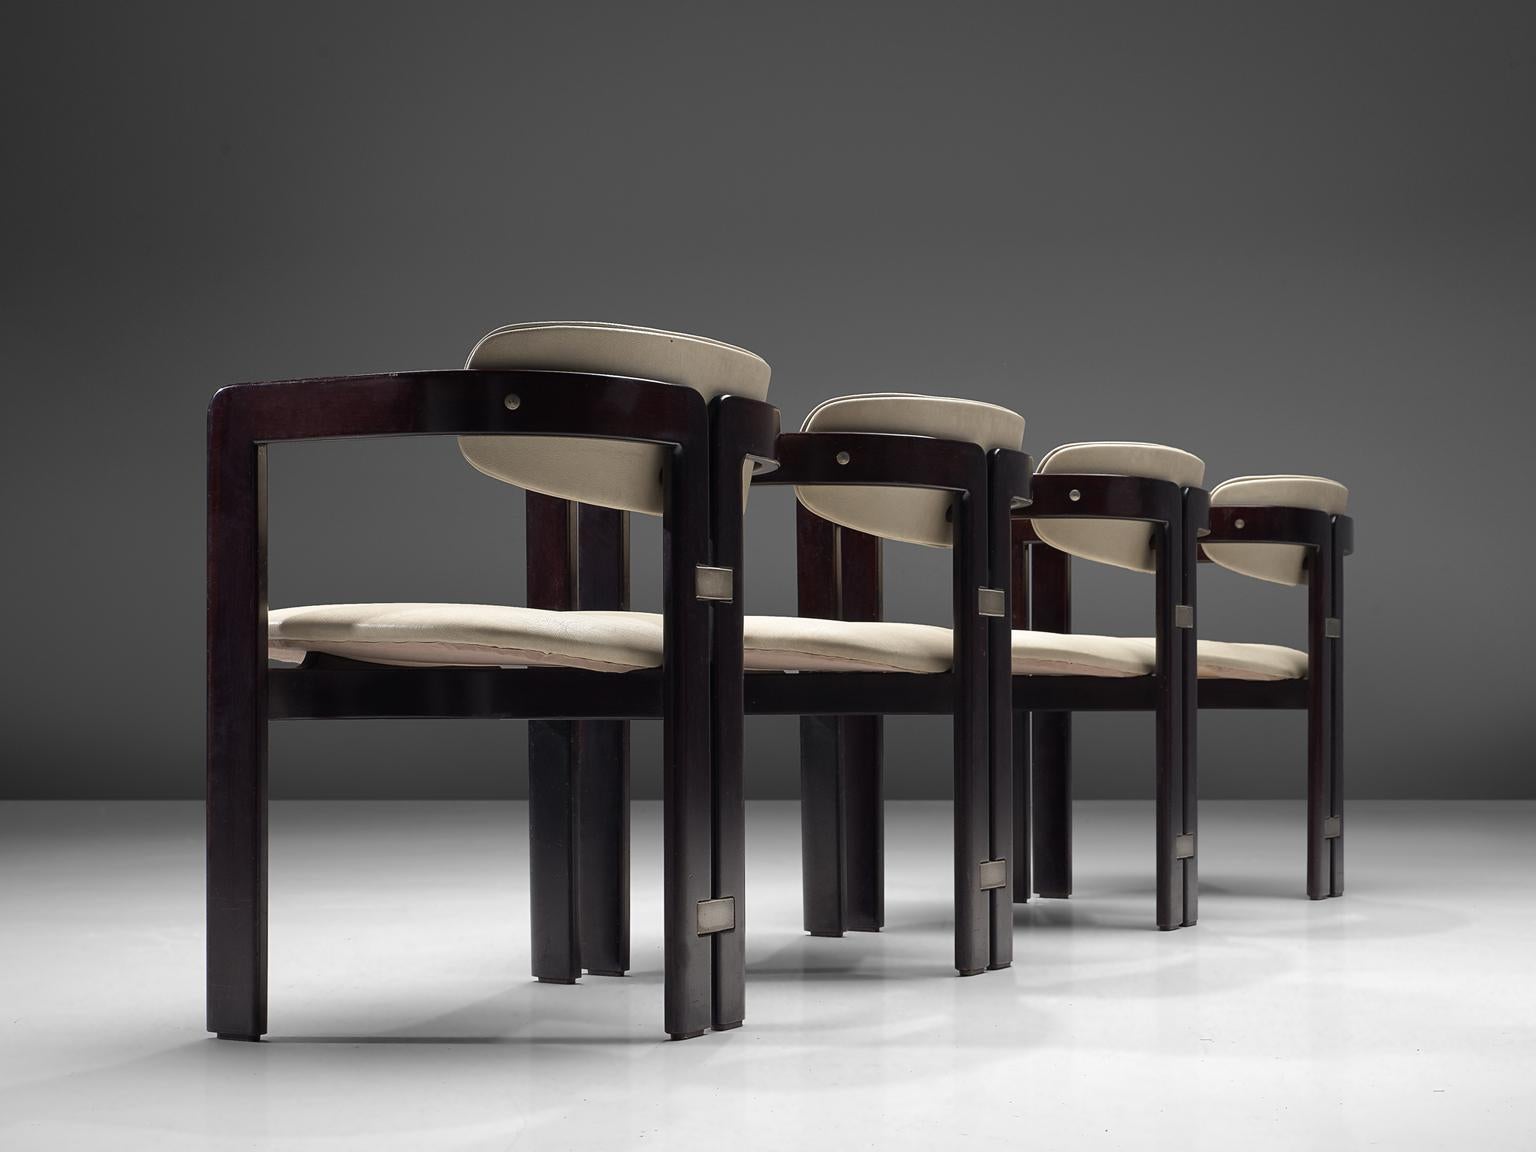 Augusto Savini for Pozzi, set of 4 ‘Pamplona’ armchairs, sand colored leather, ashwood, metal, Italy, 1960s.

Set of four armchairs in high gloss stained ash wood and white-sand leather. The chairs have a unique and characteristic design; simplistic